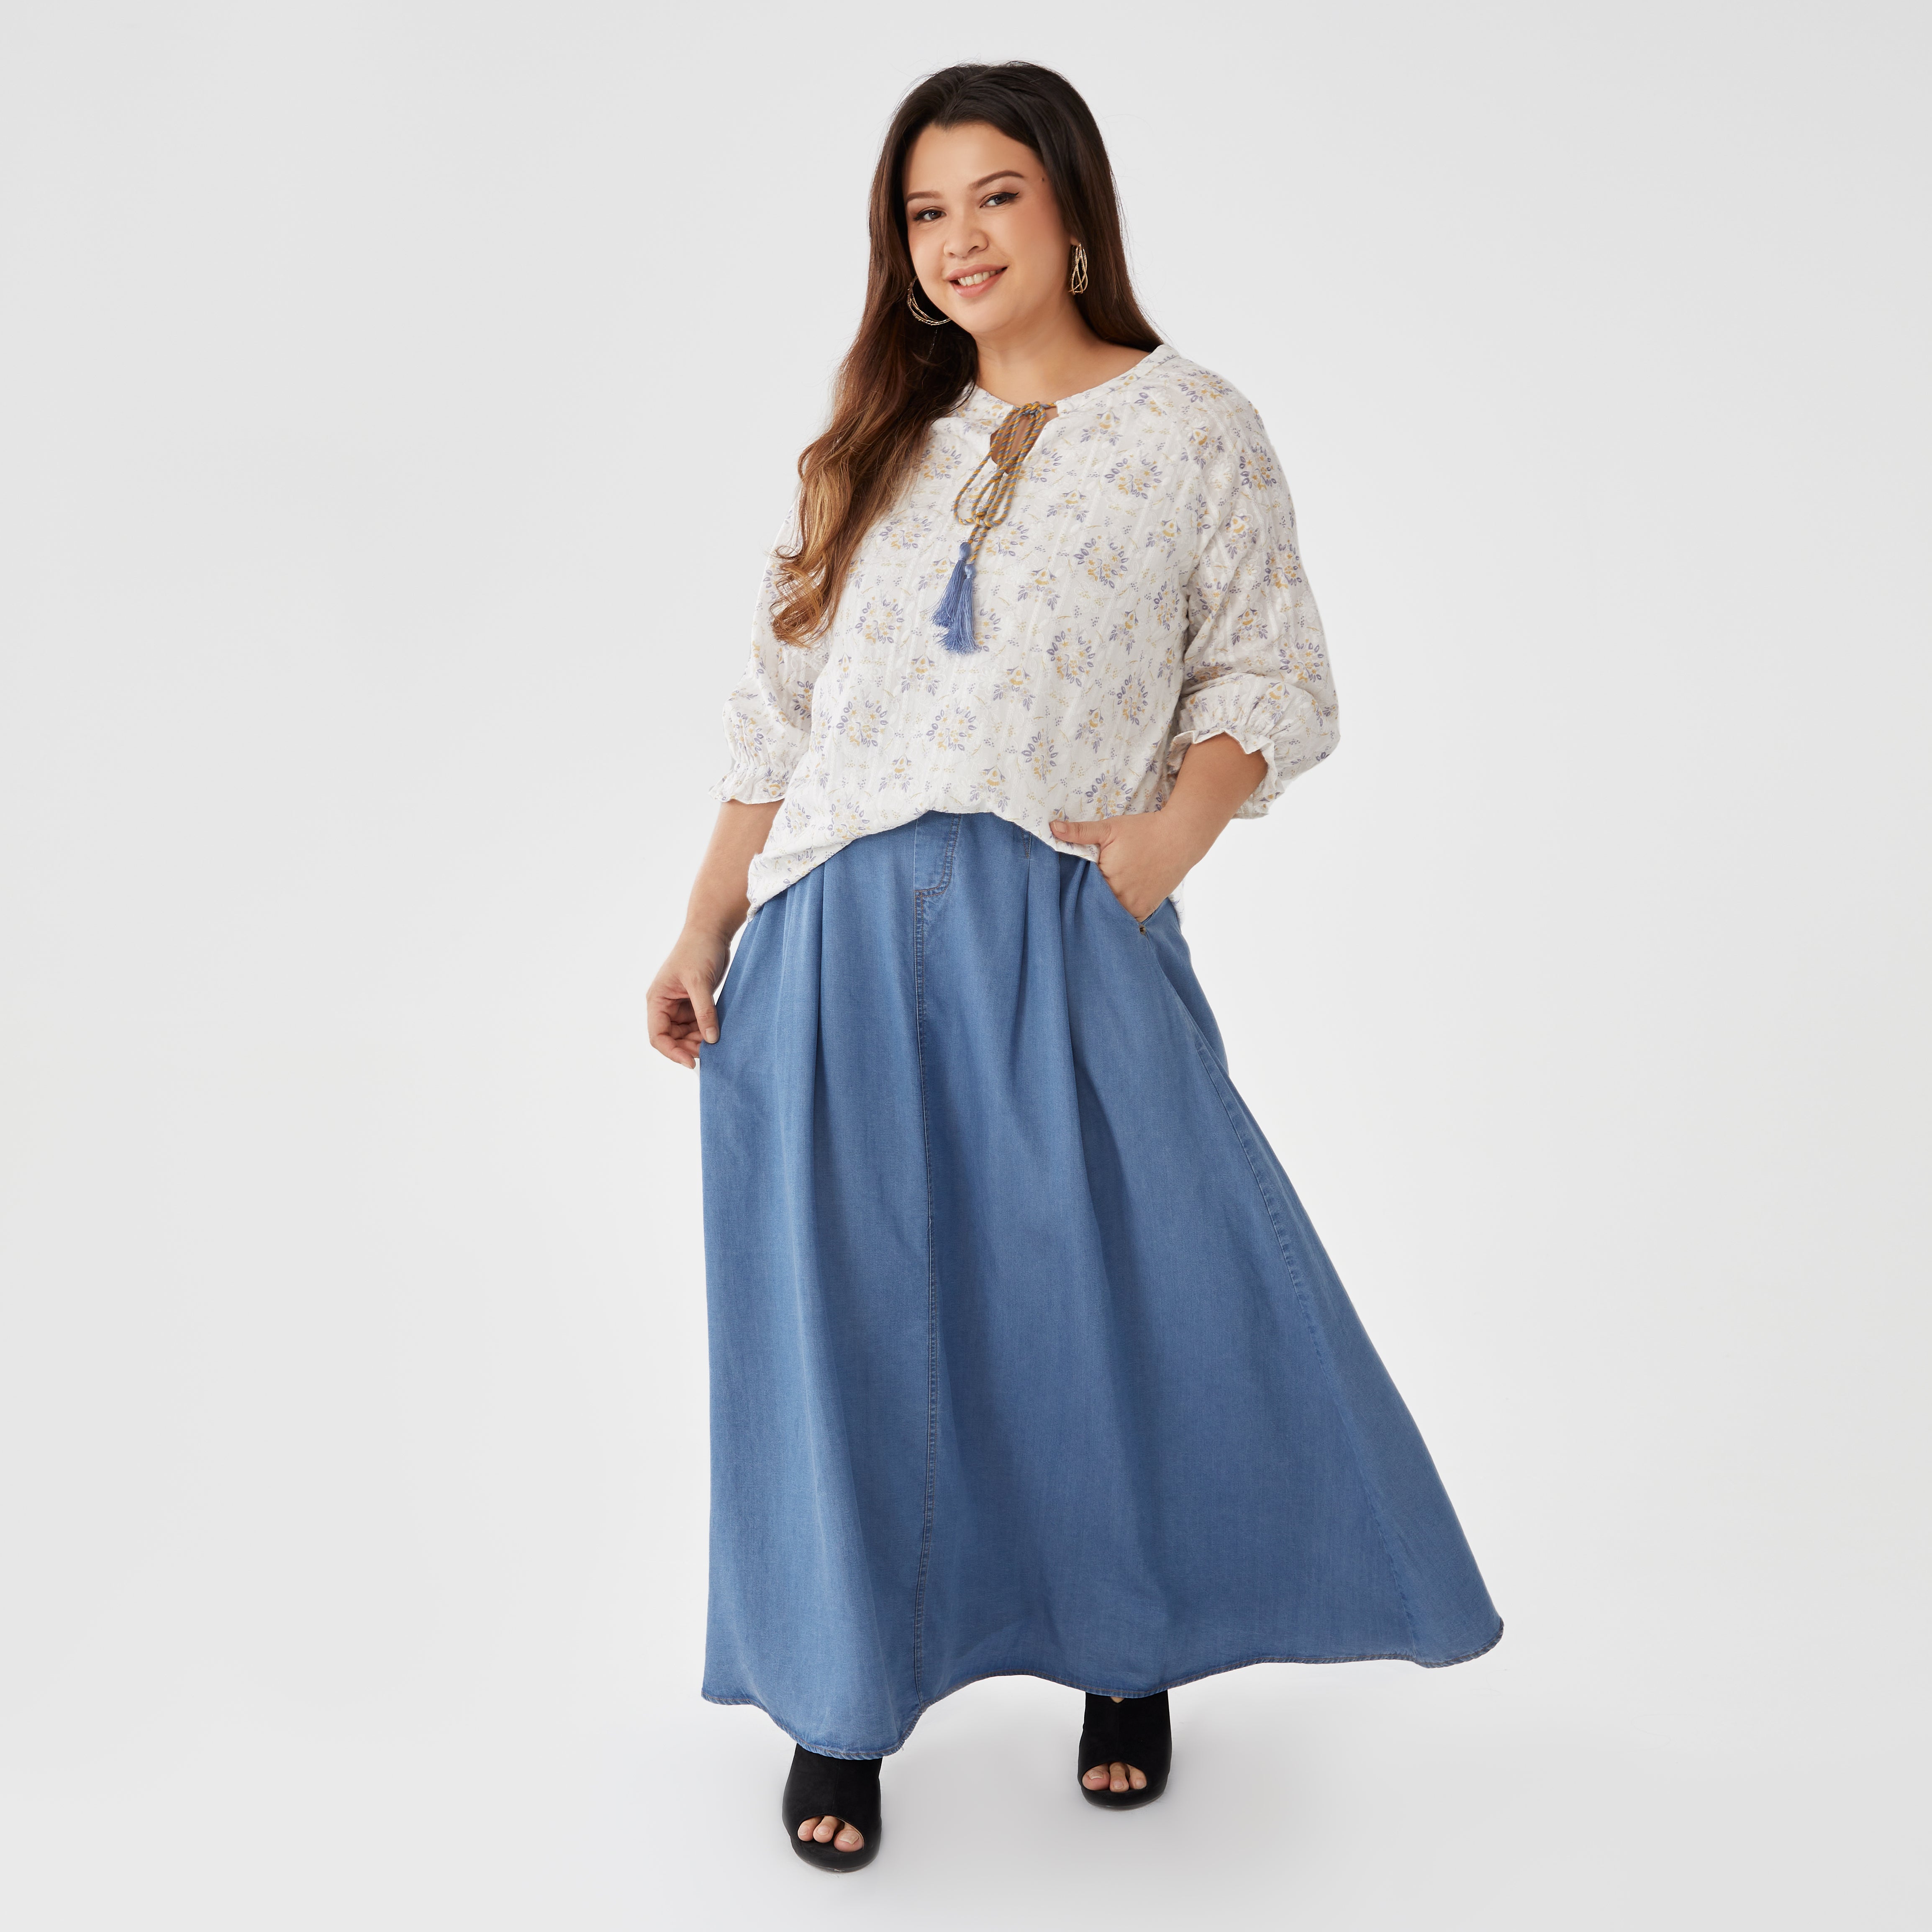 Embroidered Cotton Peasant Top